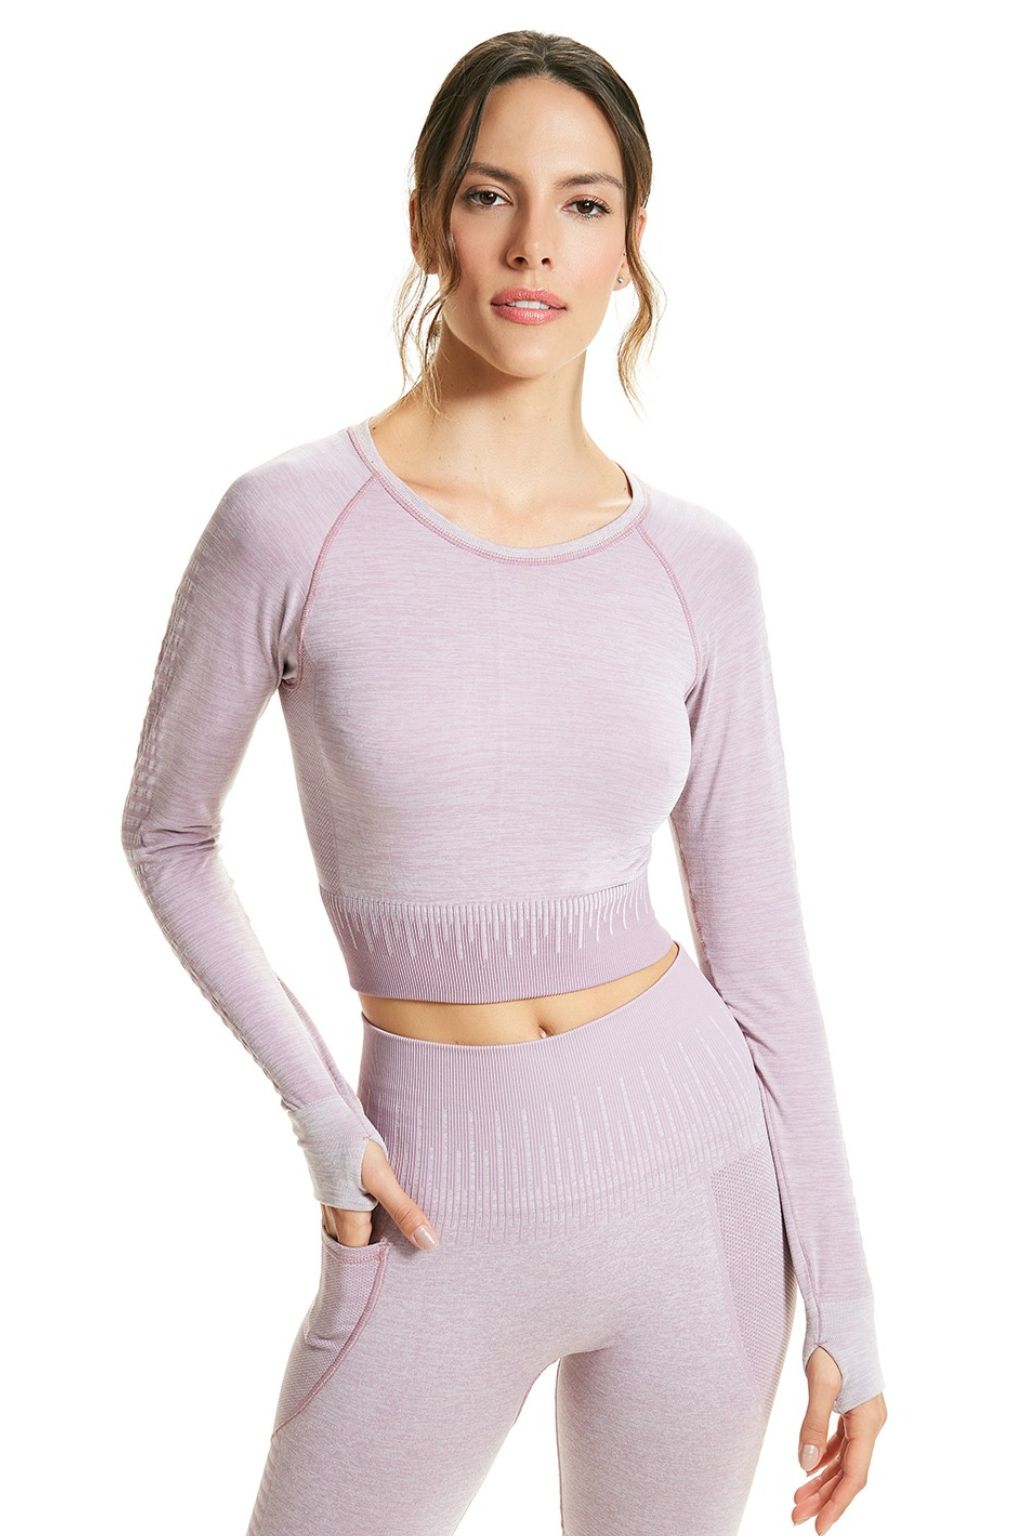 FITNESS Cropped Long Sleeve Top